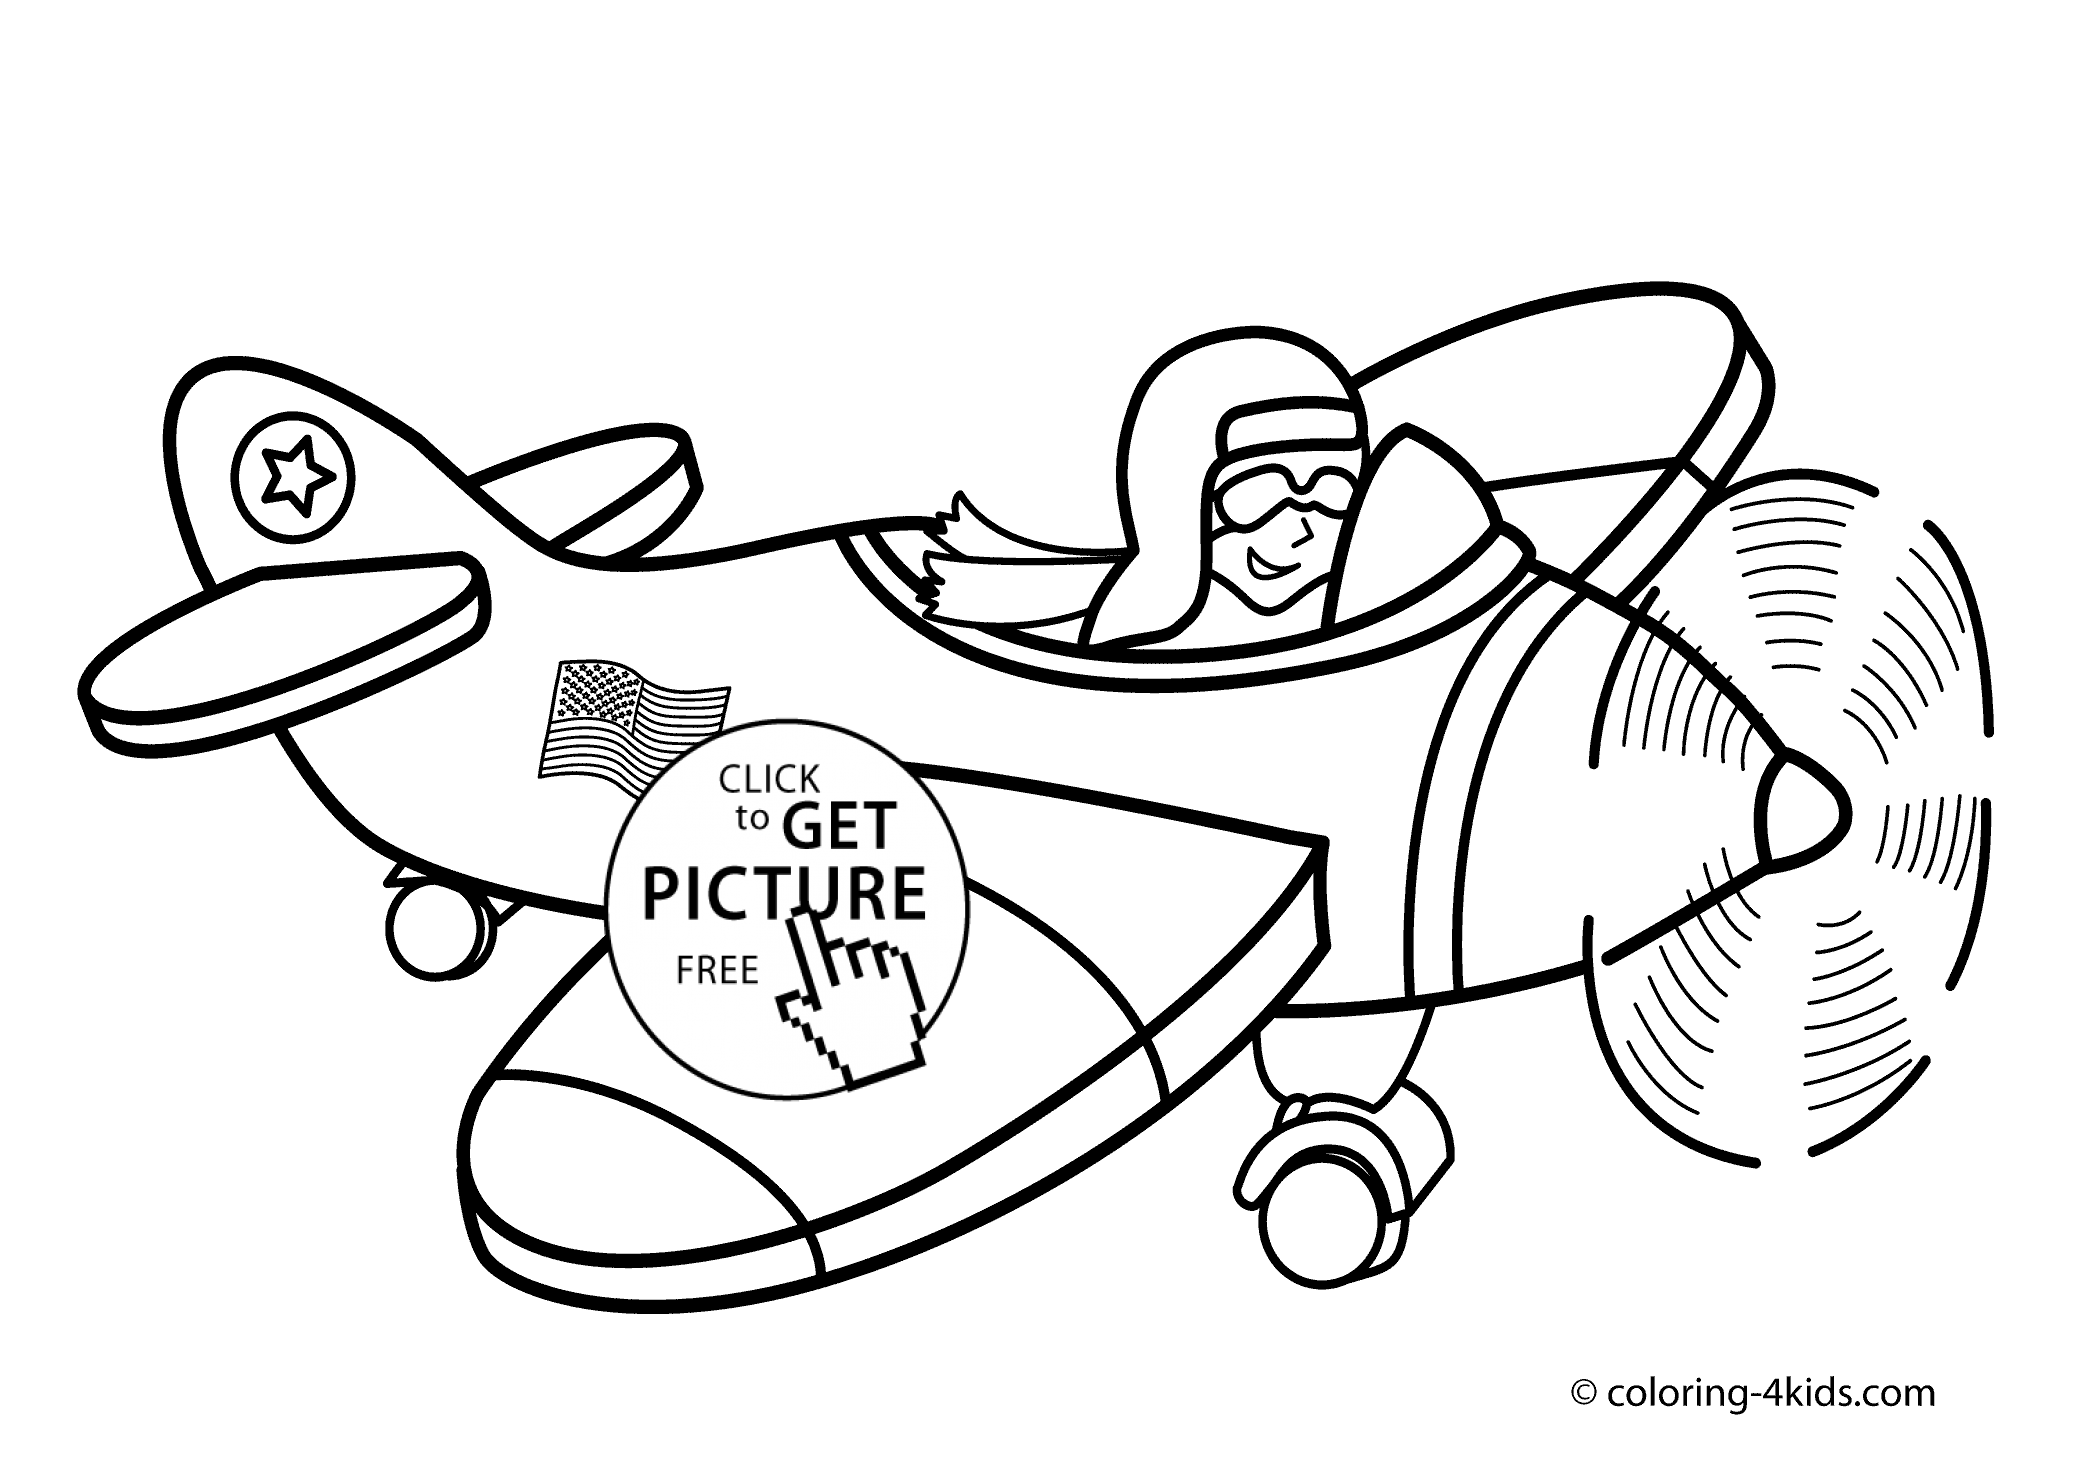 Cool Air Plane 11 Coloring Page